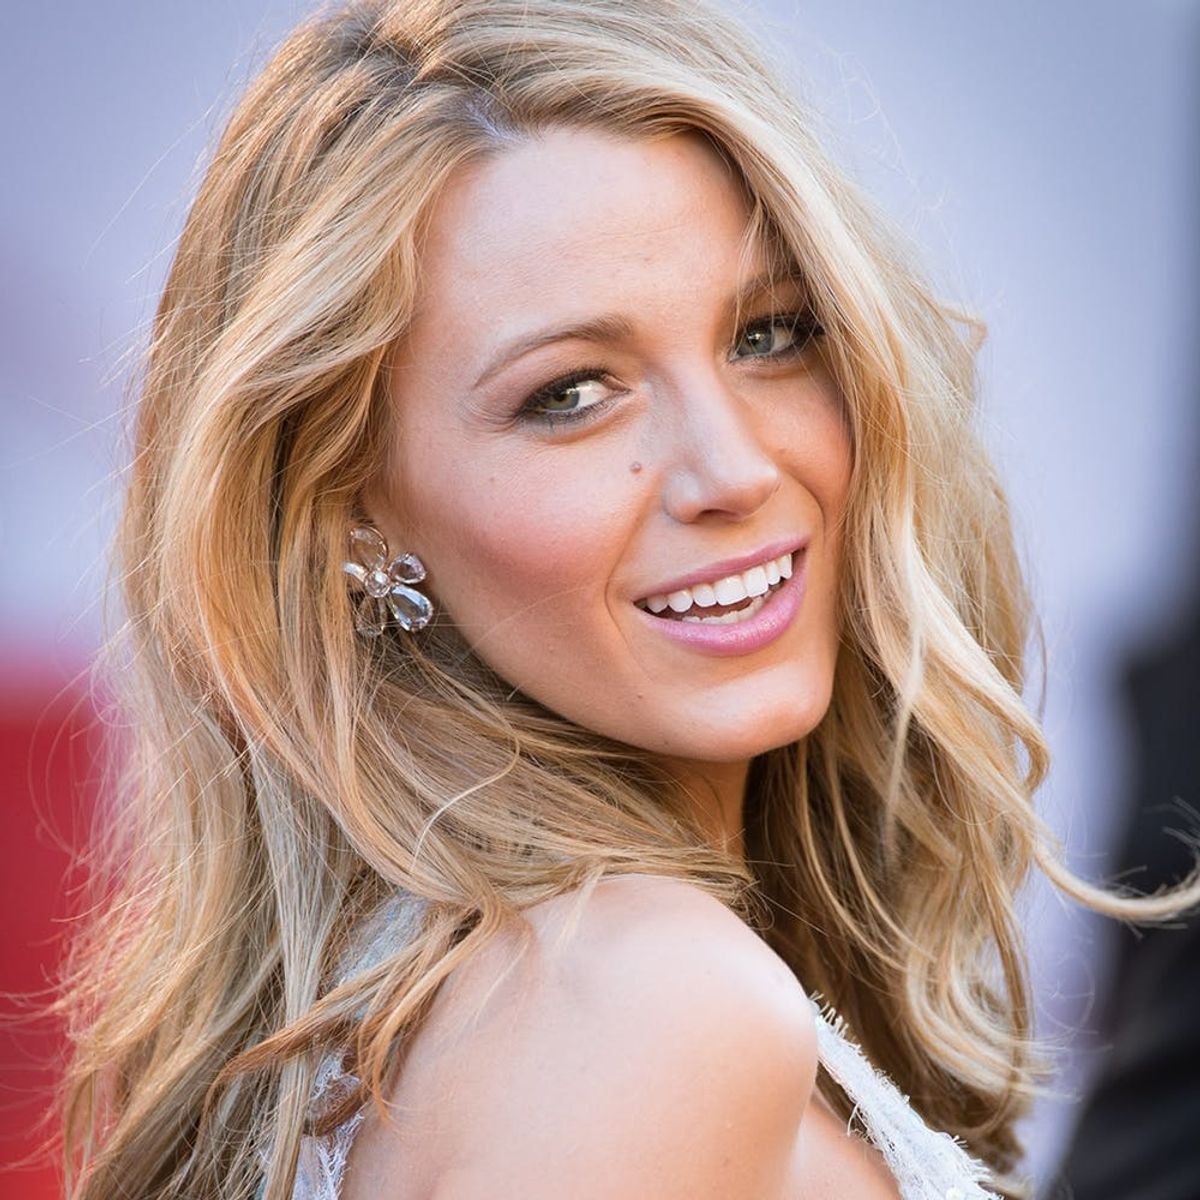 Blake Lively’s New Year Resolutions Are Going Just as Well as Yours Are